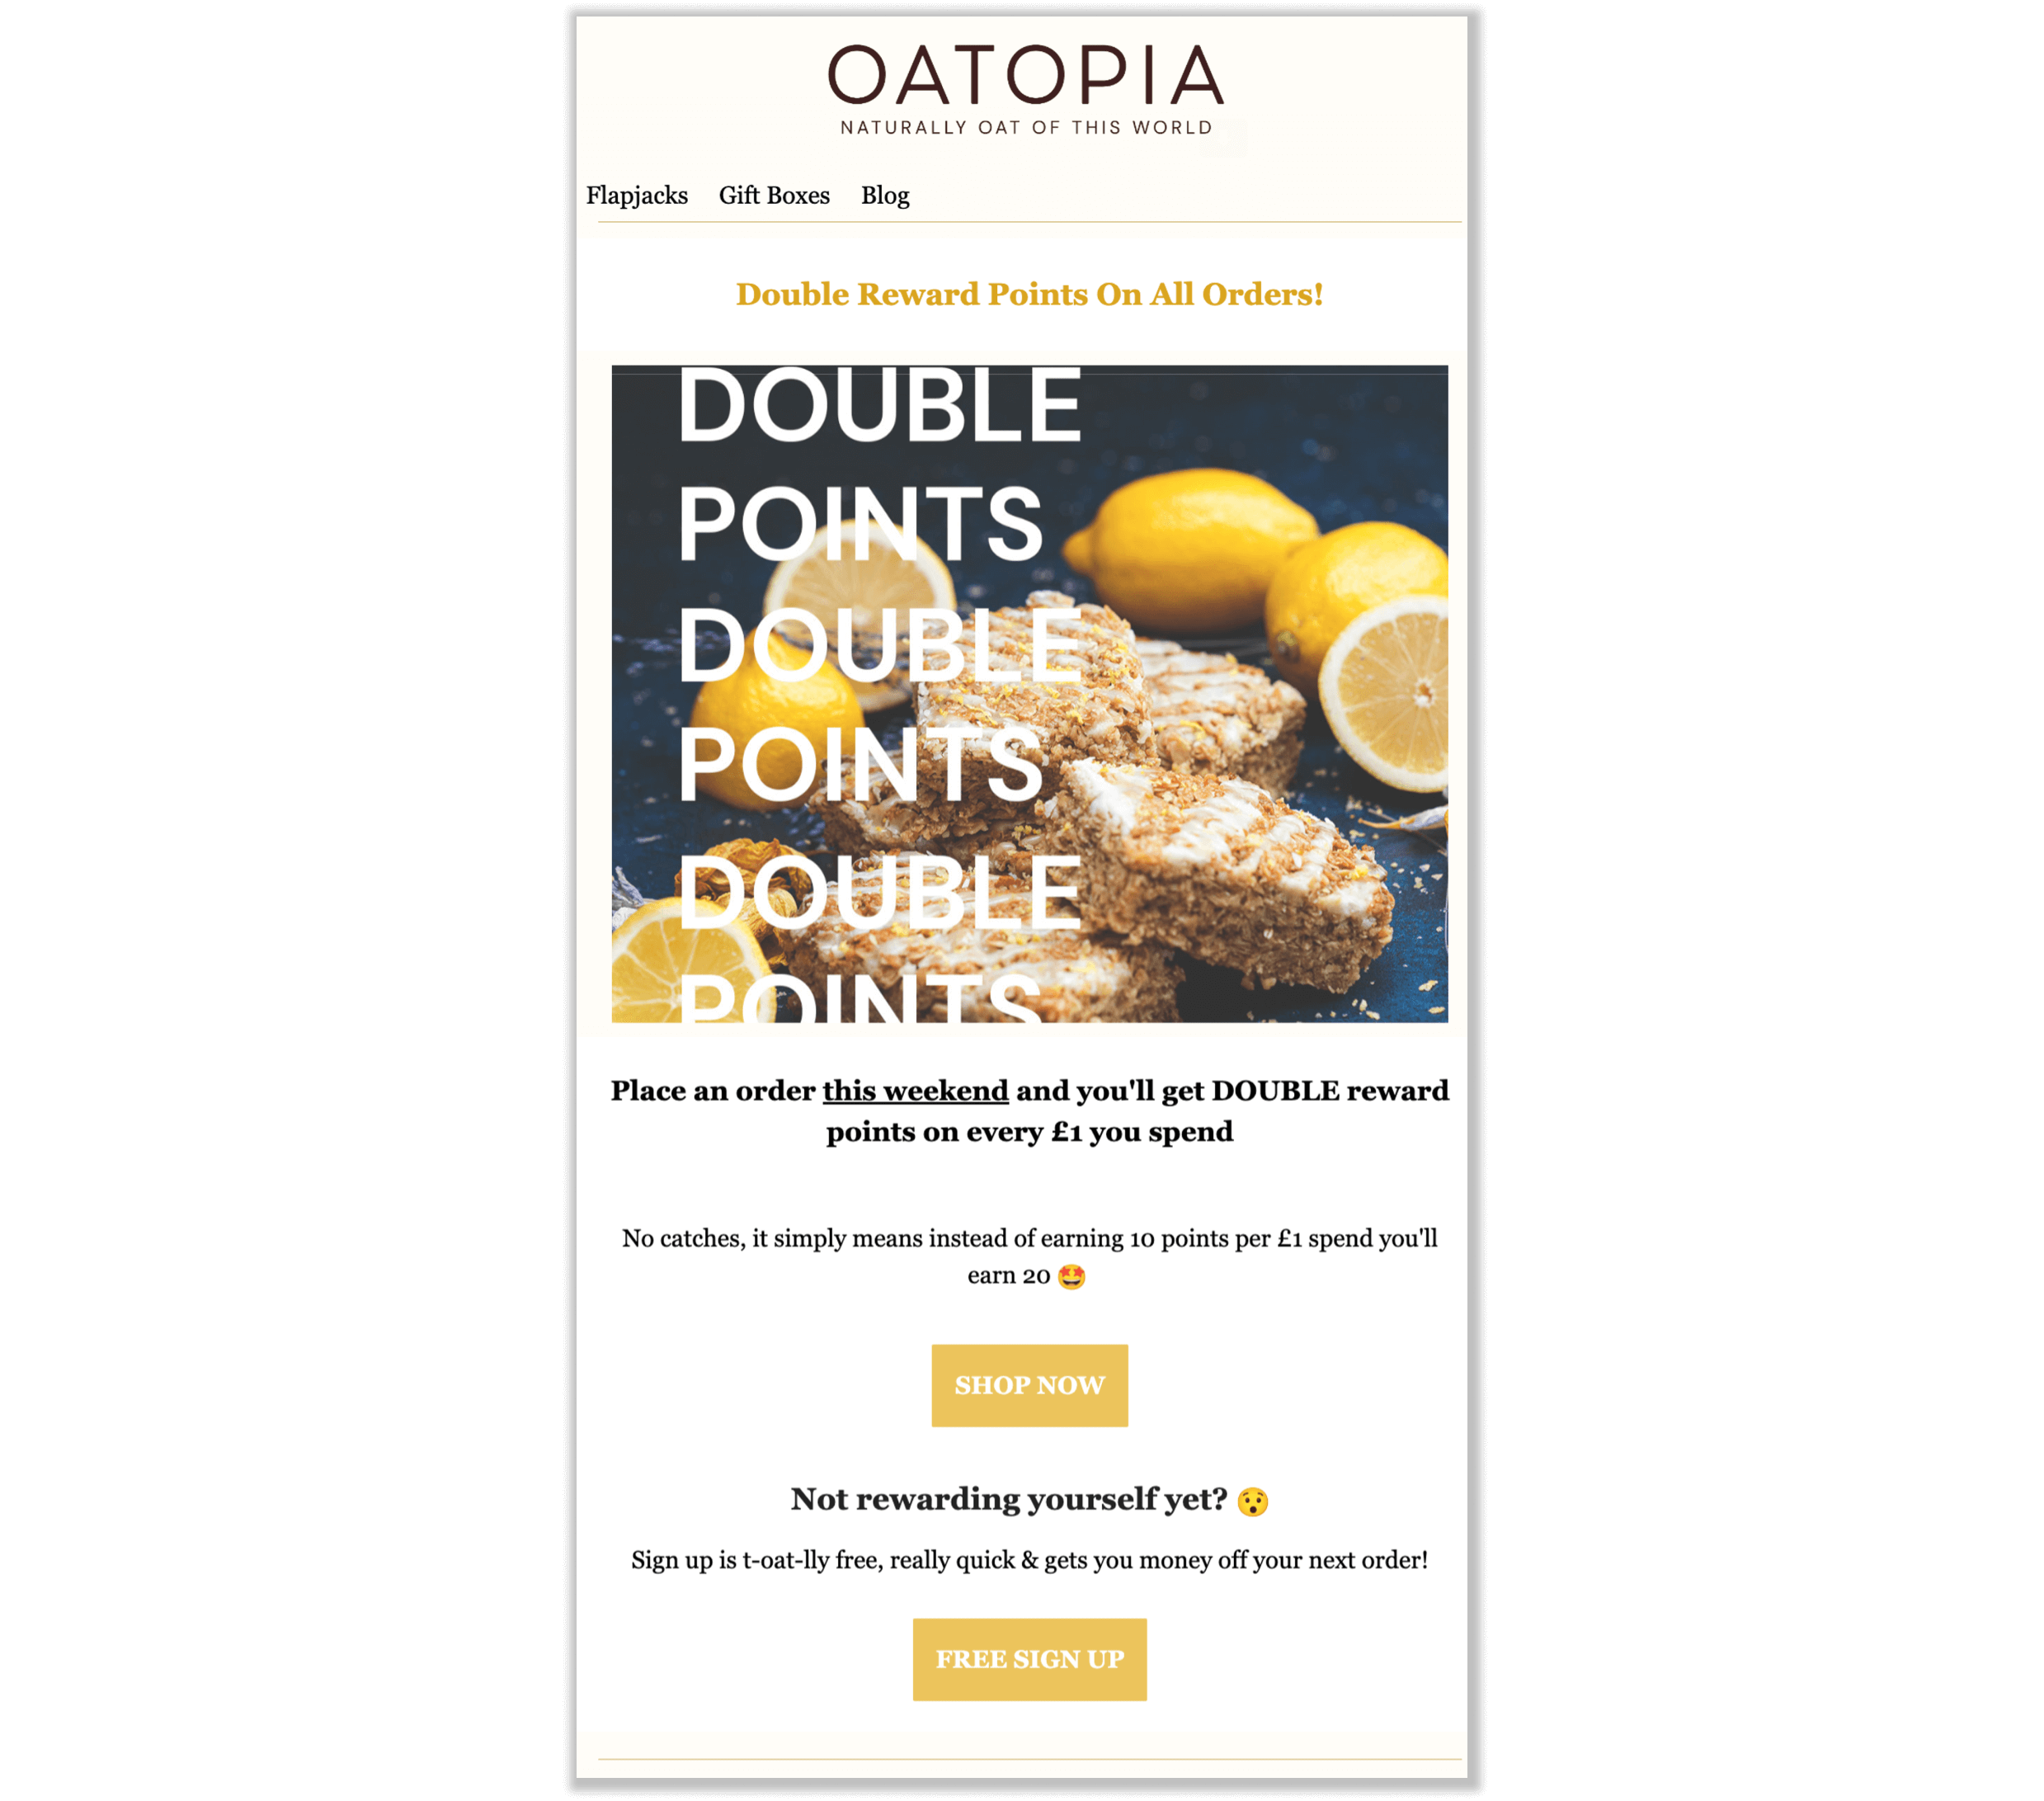 A screenshot of an email from Oatopia explaining its bonus points campaign. A branded email explains that customers can earn double reward points for every £1 spent that weekend. 